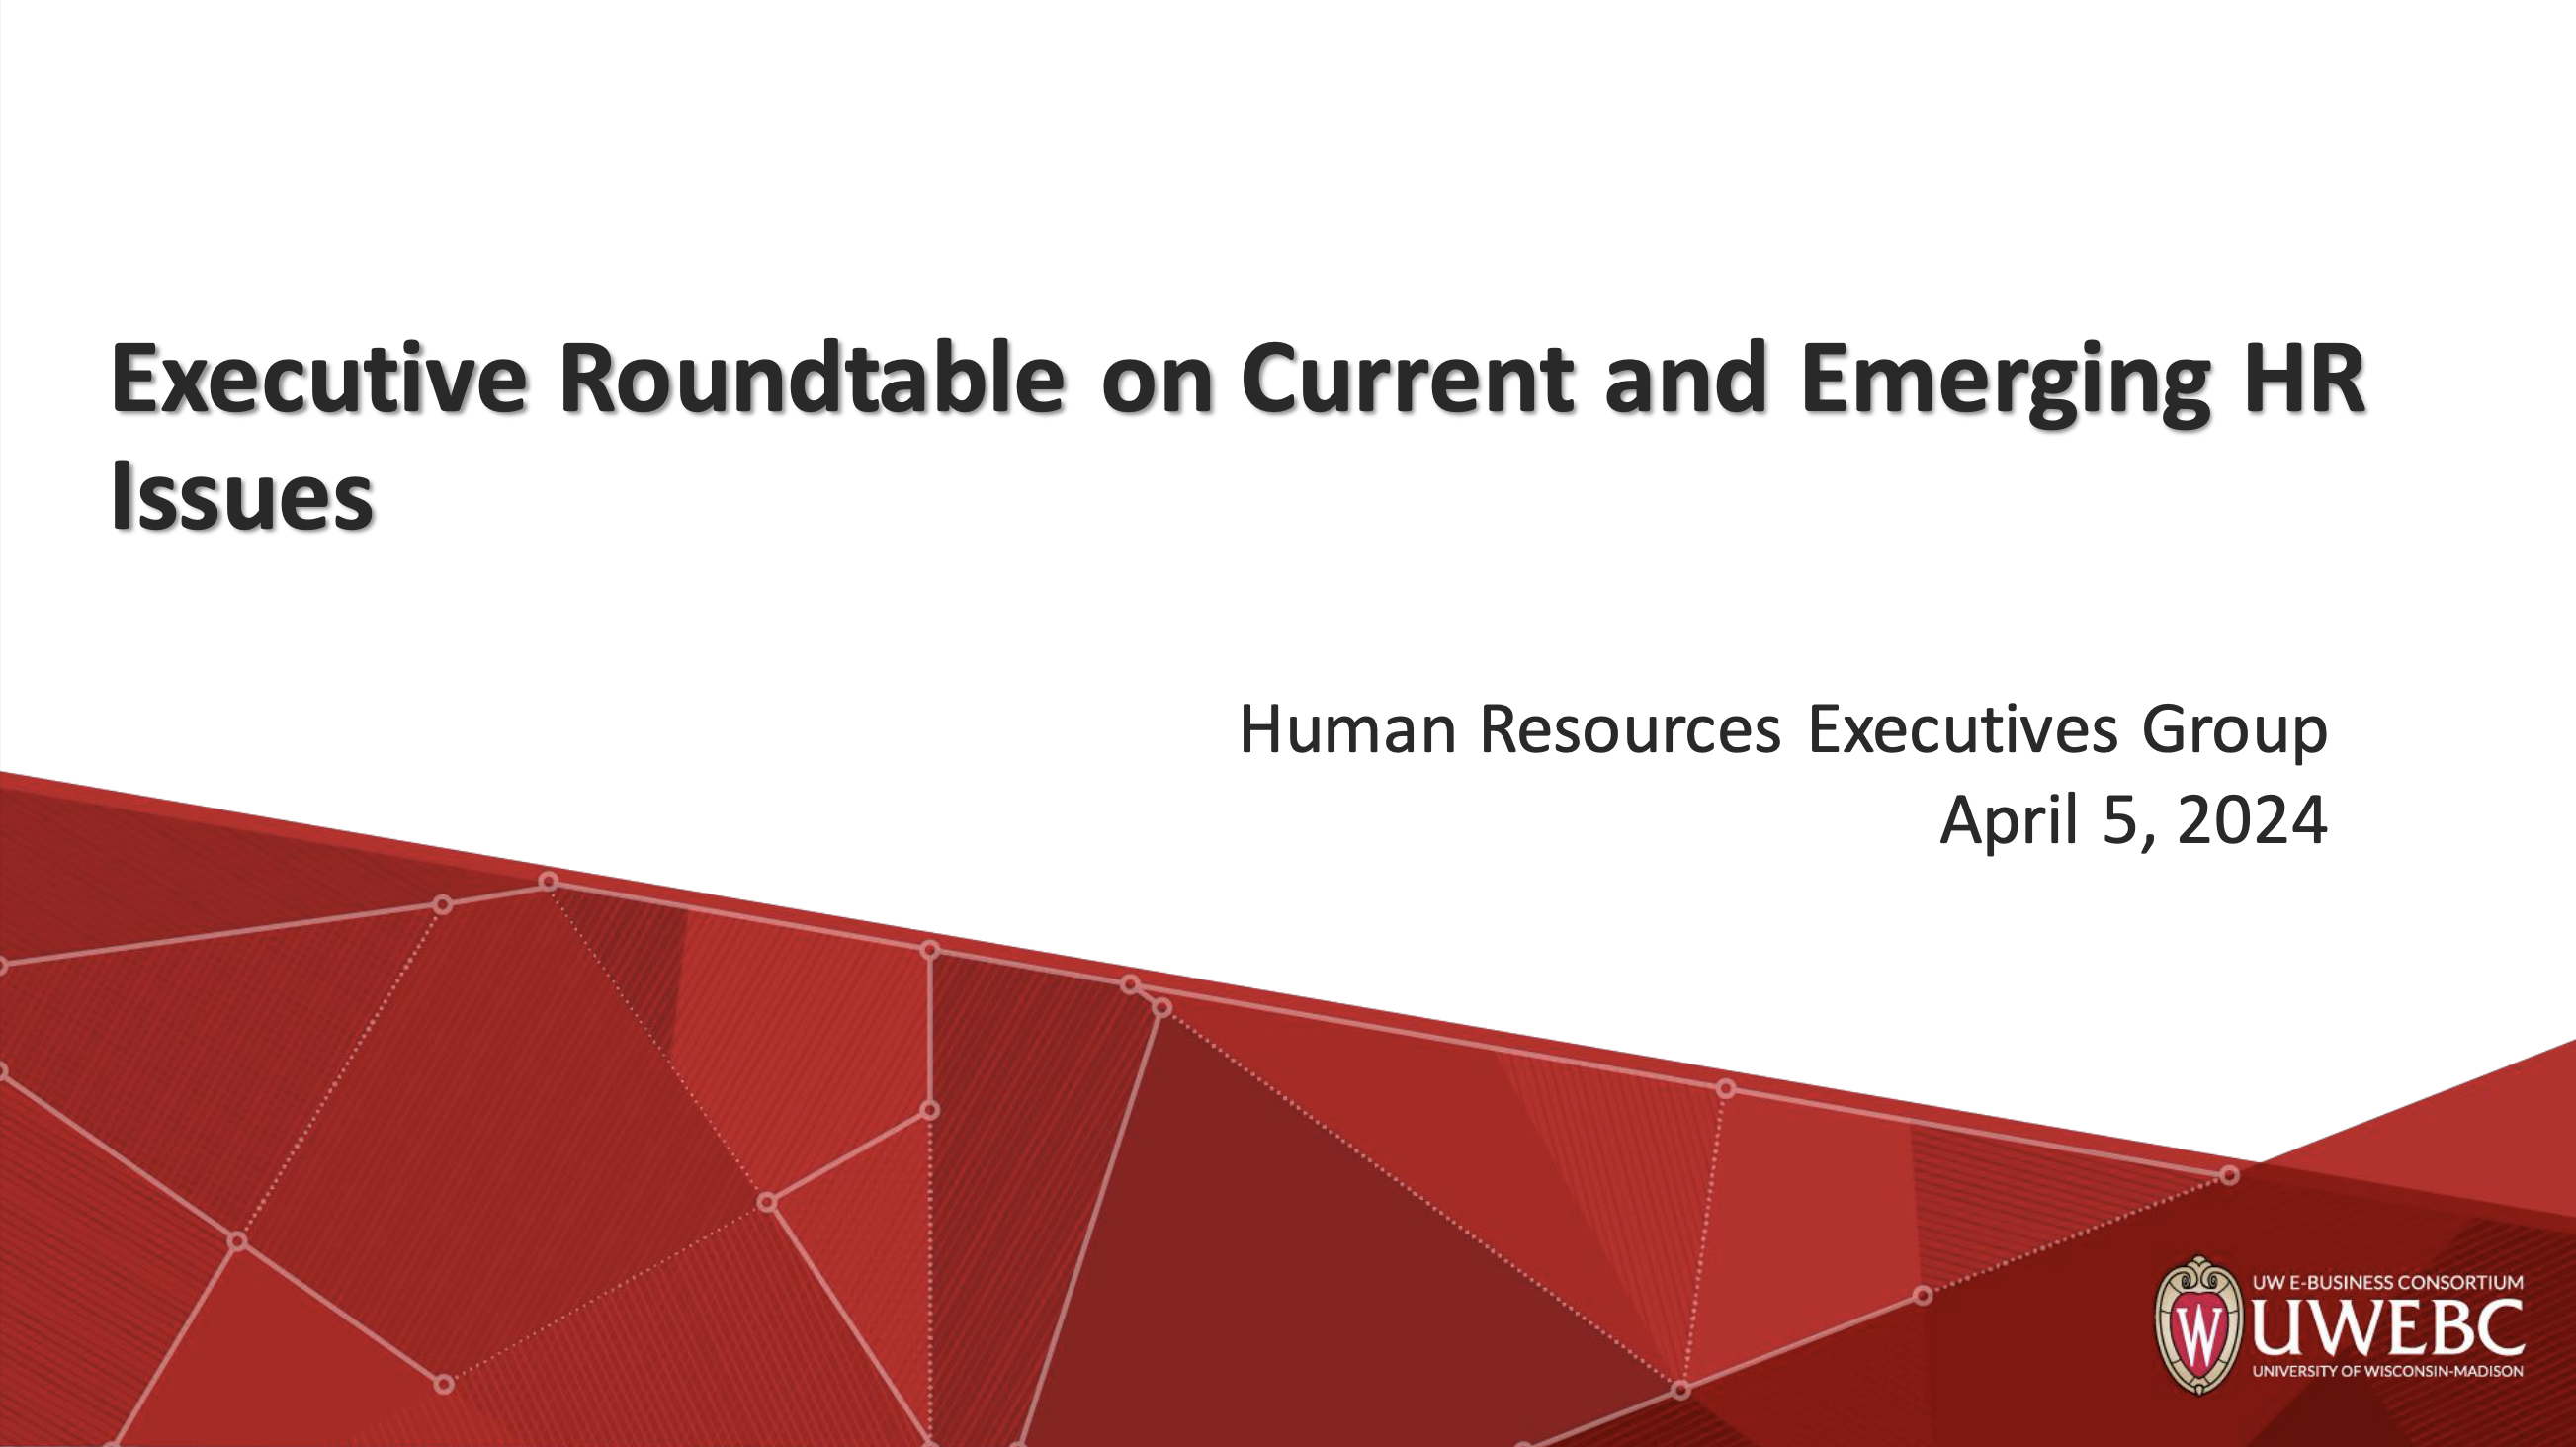 2. UWEBC Presentation Slides: Executive Roundtable on Current and Emerging HR Issues thumbnail